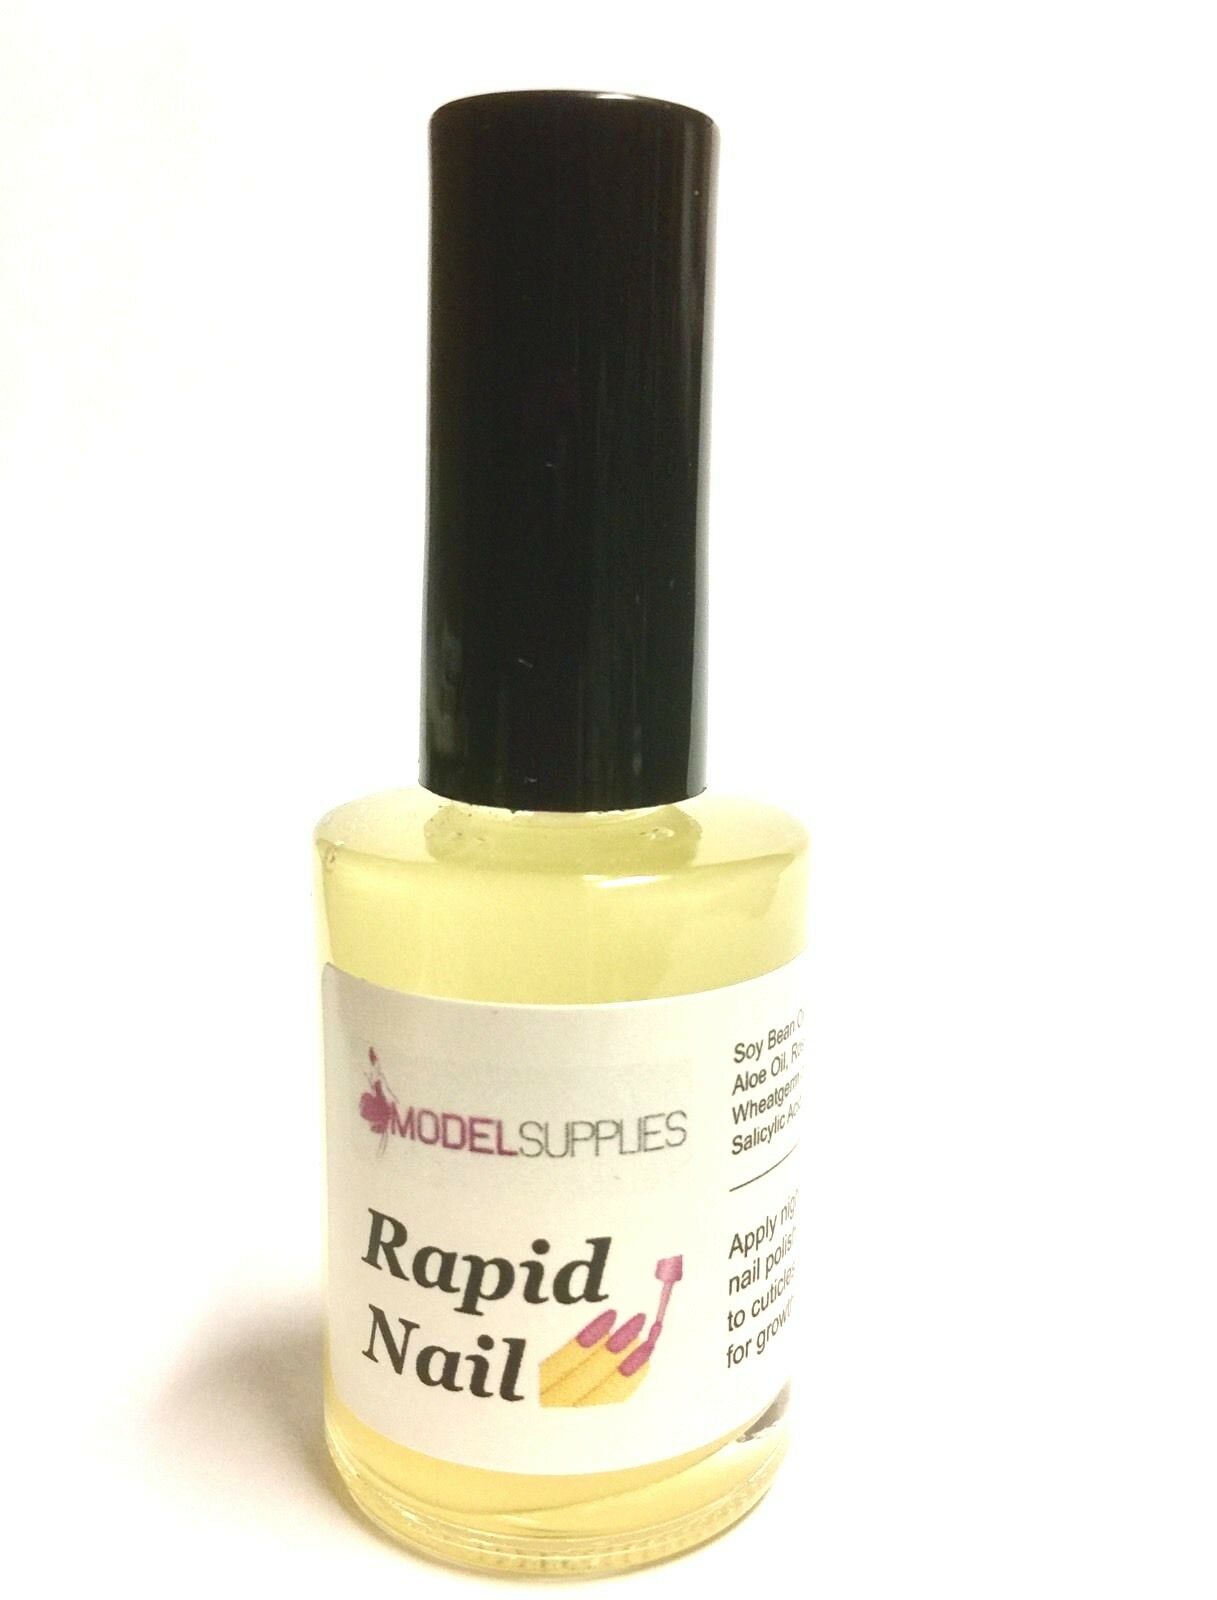 Rapid Nail Growth Modelsupplies Copper Peptides Quick Dry Strengthen Grow Nails